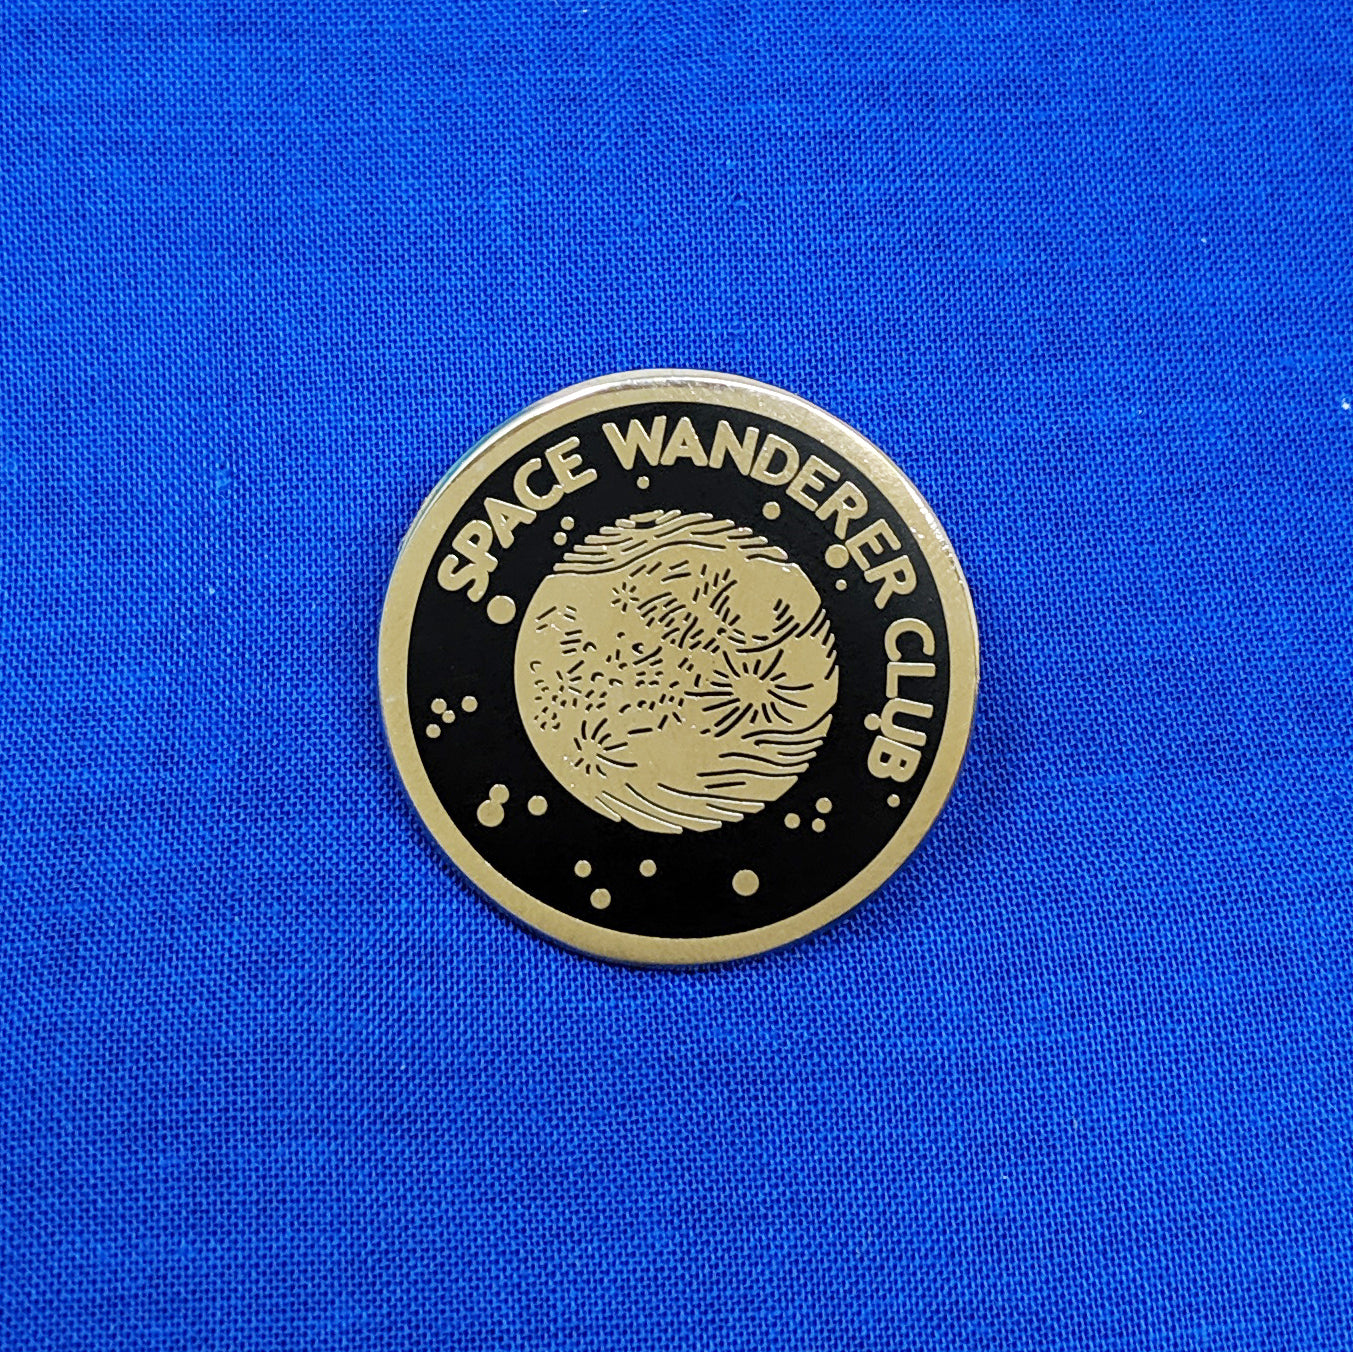 Space Wanderer Club Pin